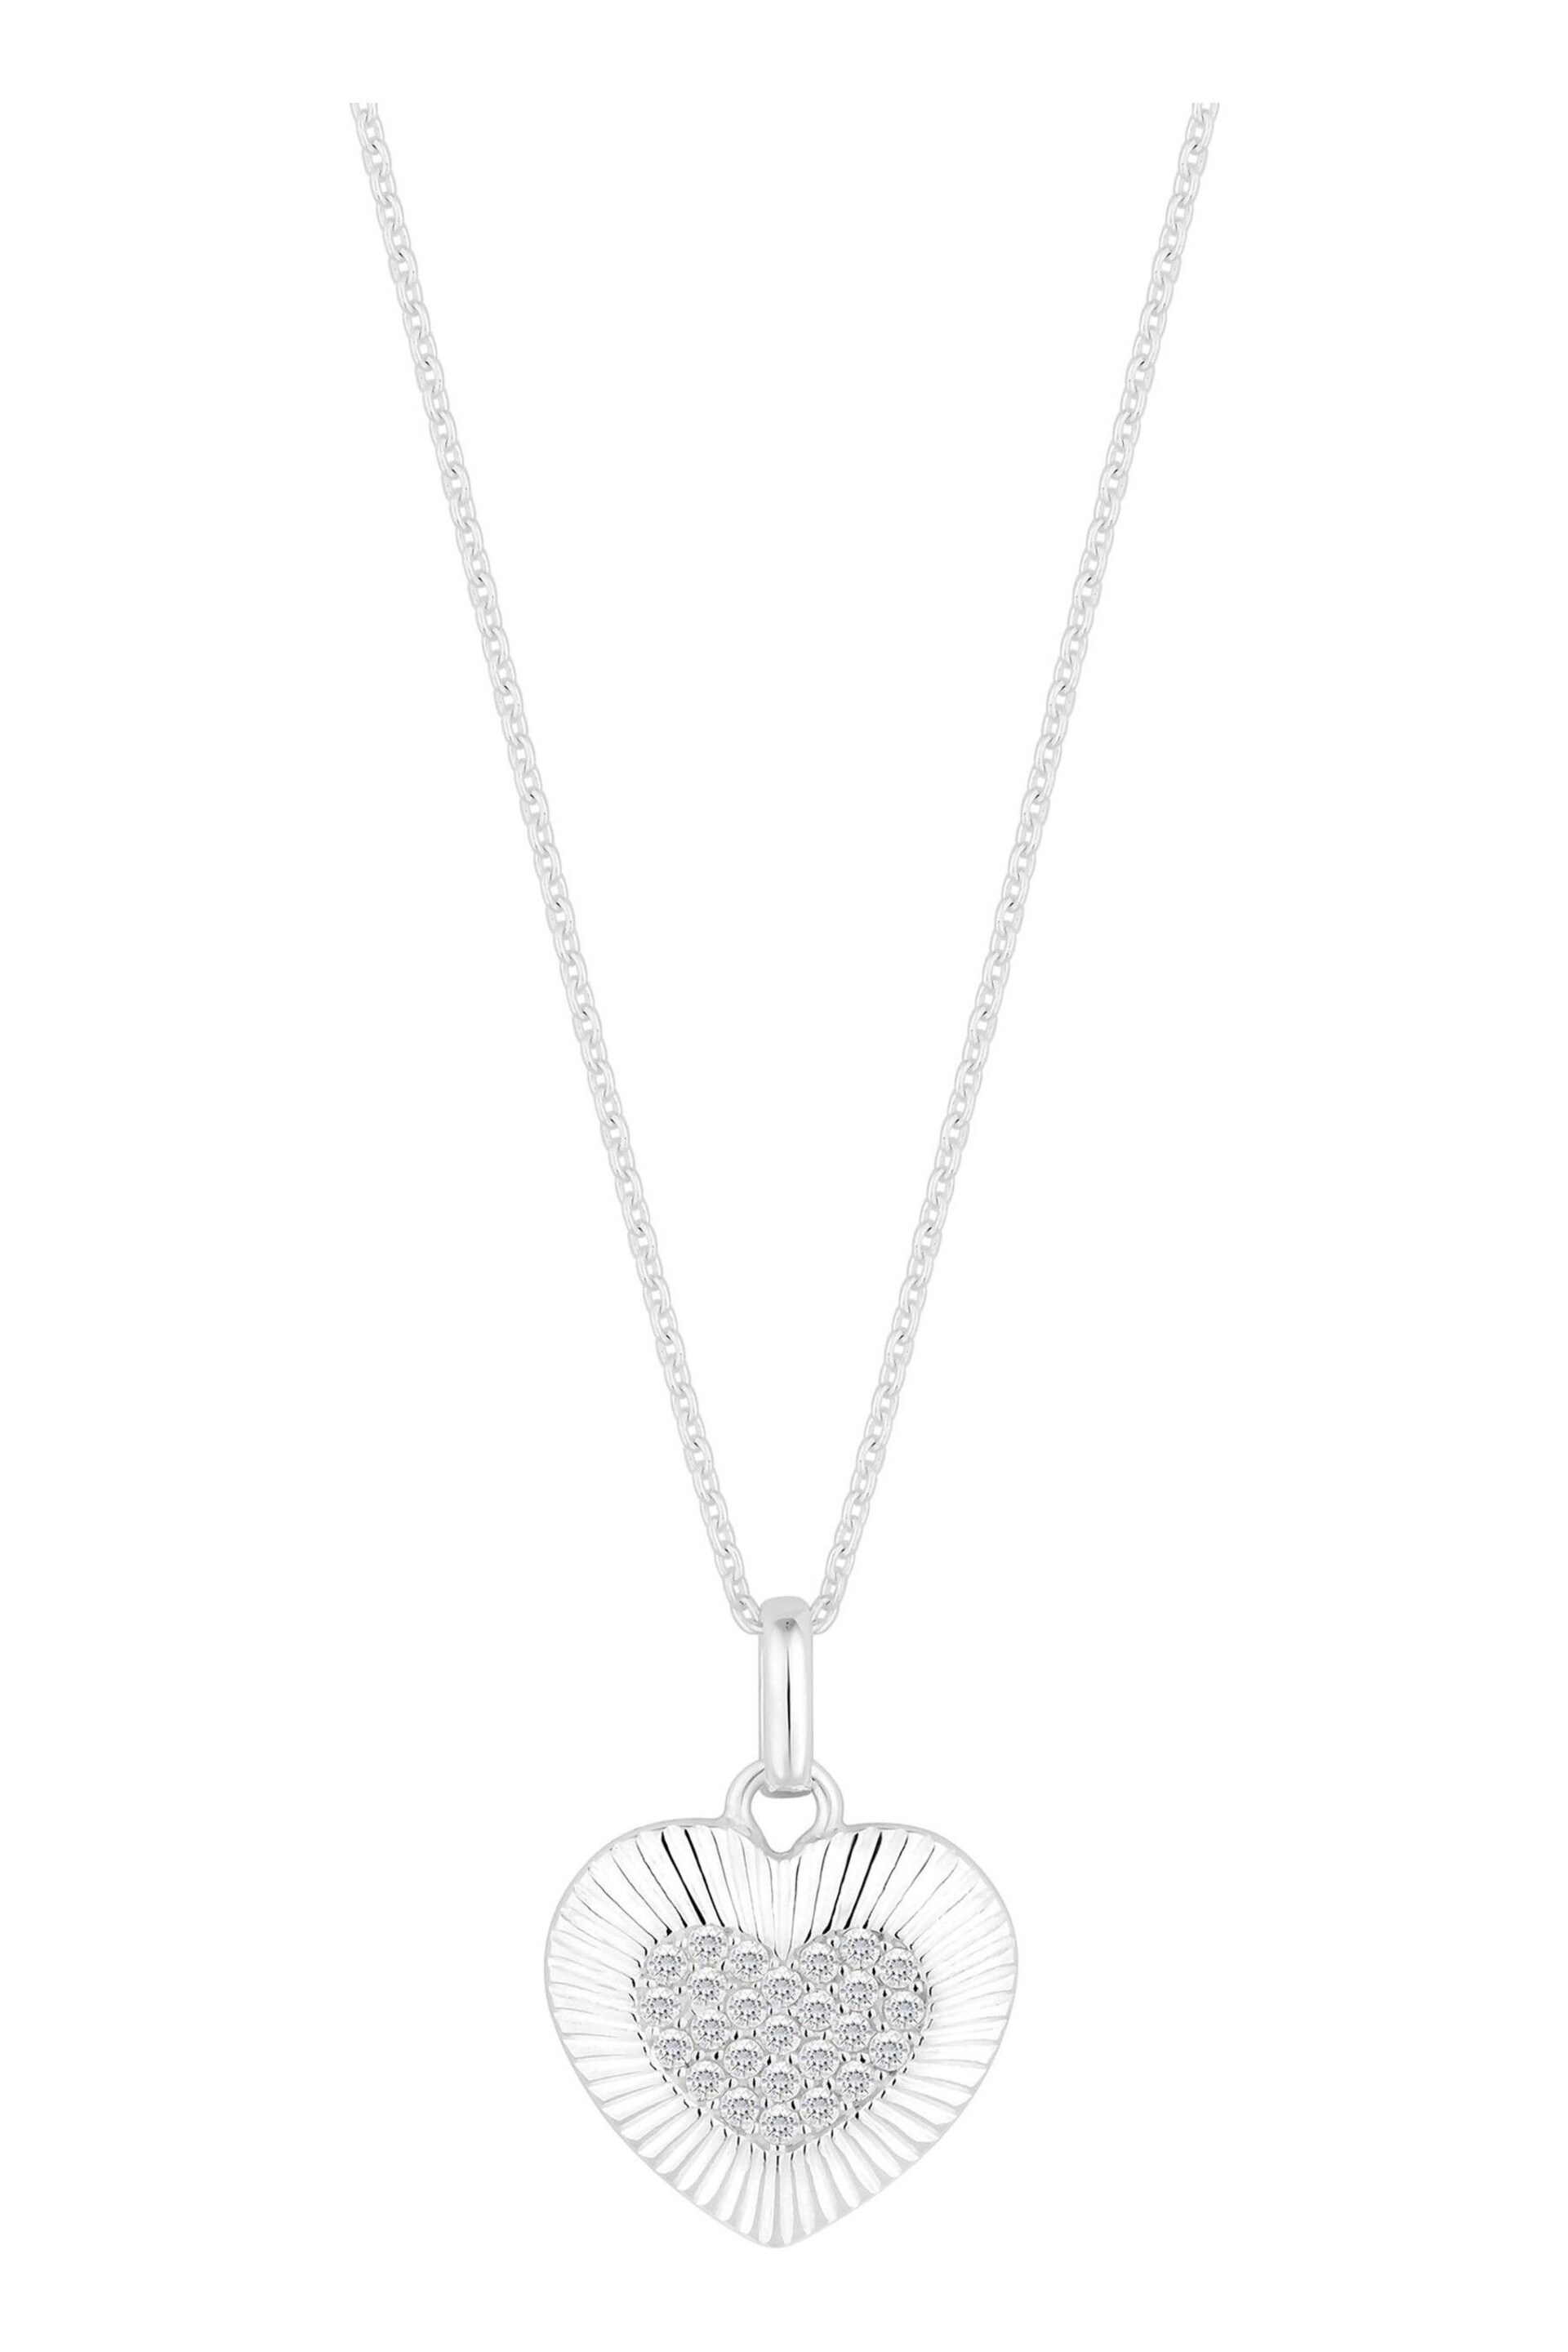 Simply Silver Silver Tone Polished And Pave Heart Pendant Necklace - Image 1 of 4